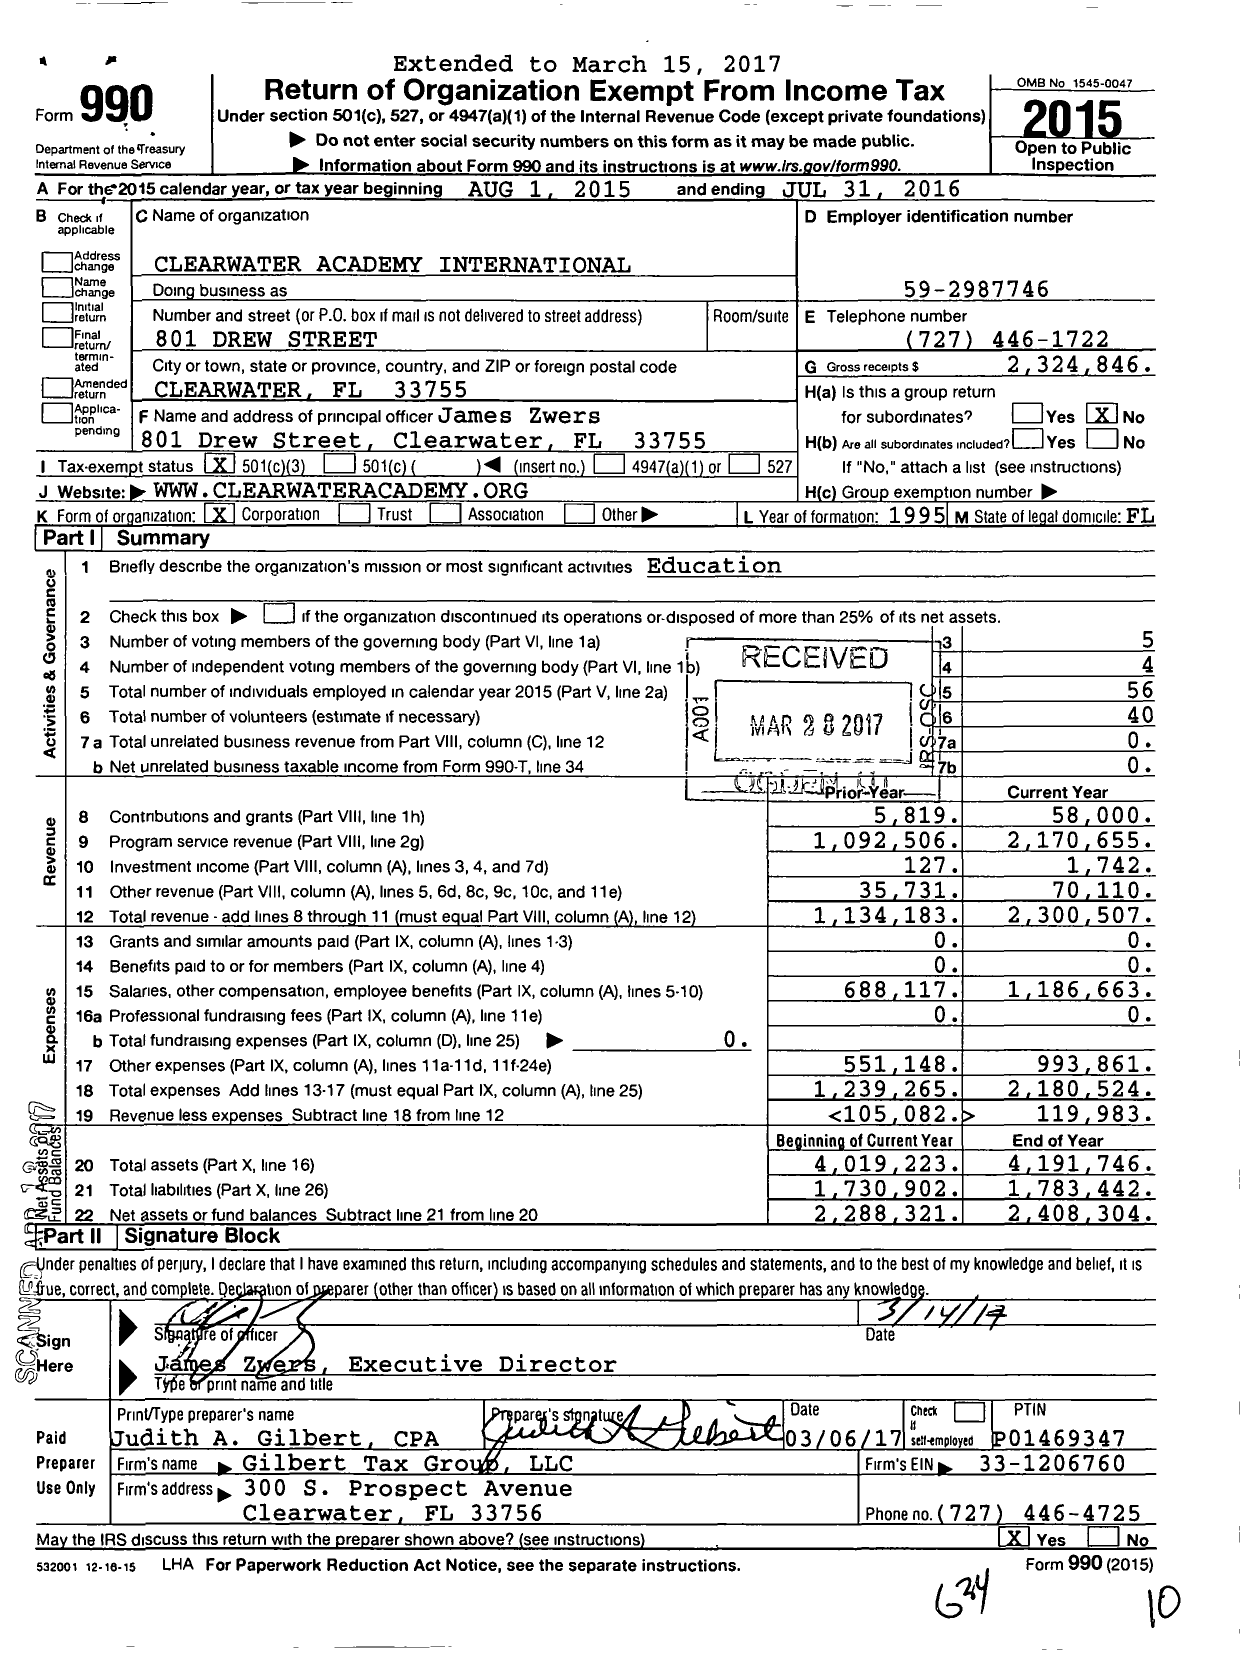 Image of first page of 2015 Form 990 for Clearwater Academy International (CAI)